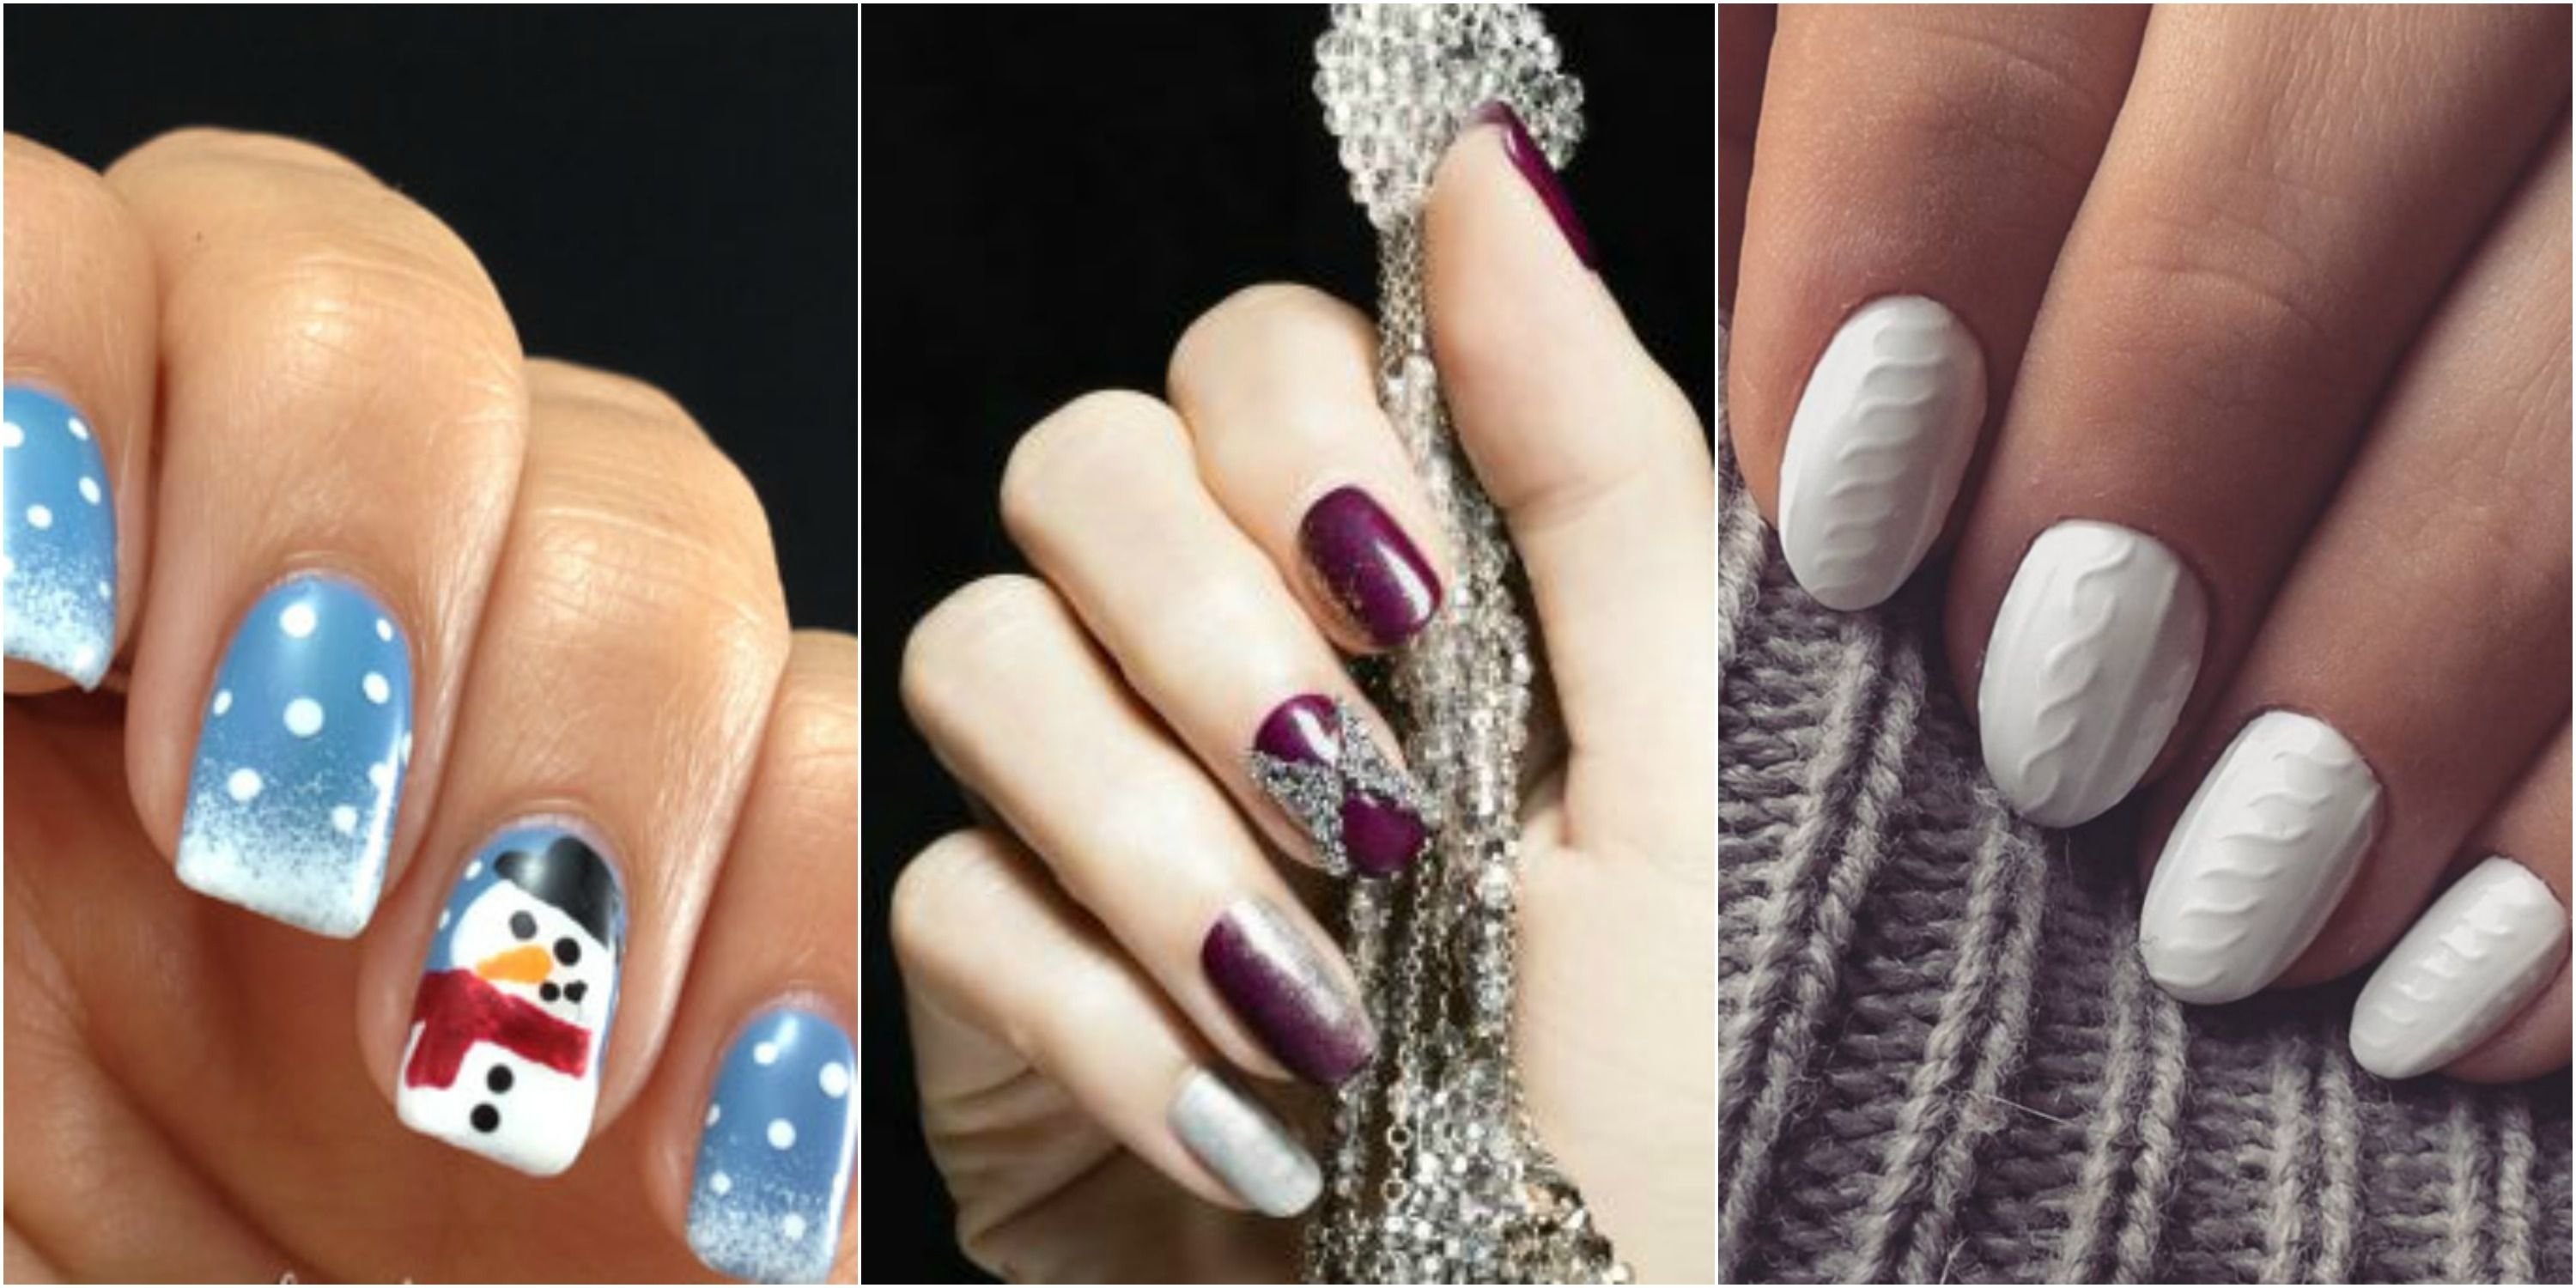 10 Spectacular Cute Nail Ideas For Winter 16 winter nail art ideas designs for new years and holiday nails 2022